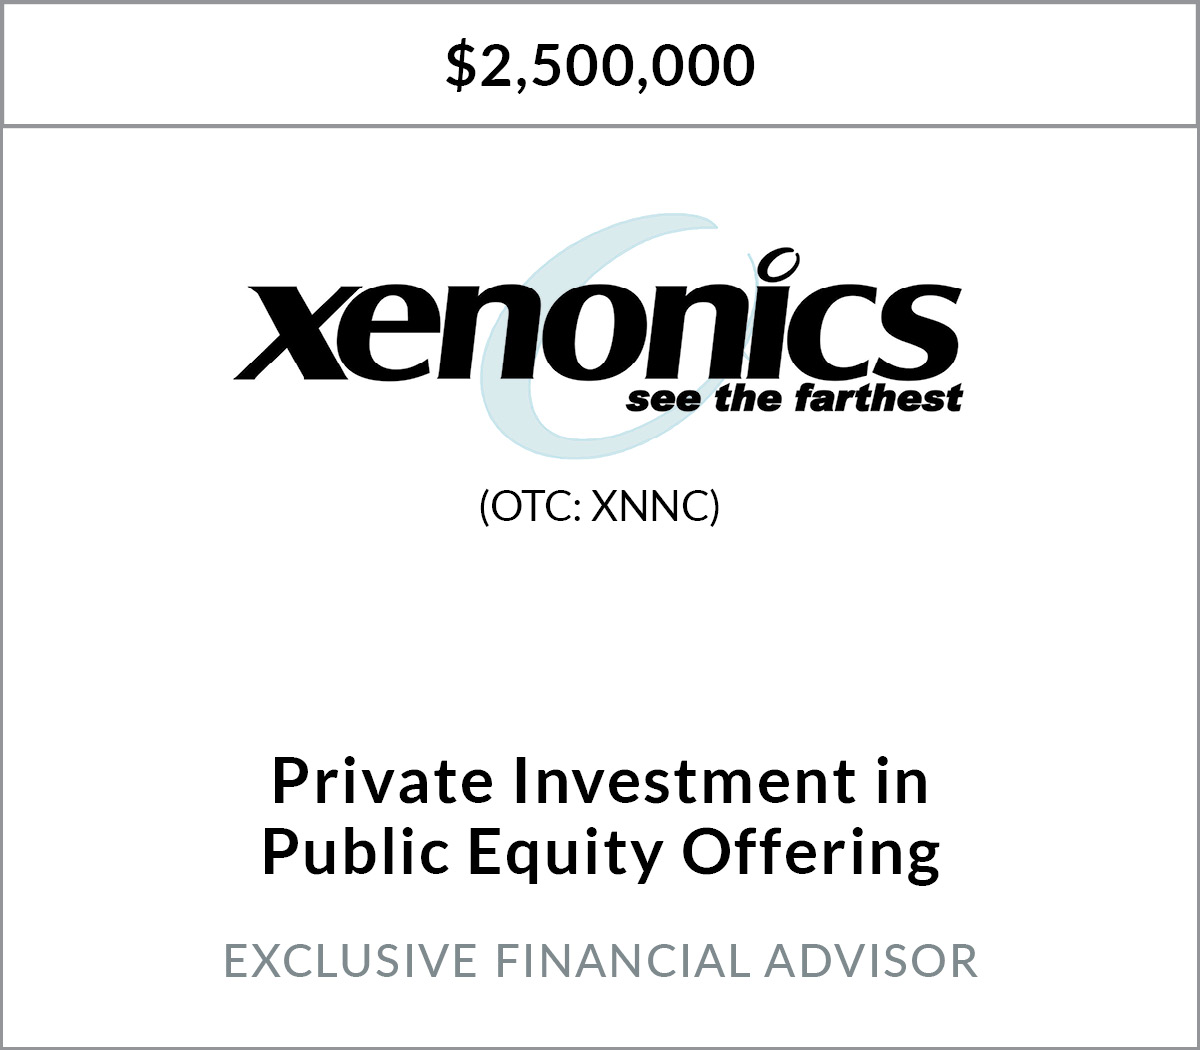 Xenonics Inc. Private Investment in Public Equity Offering